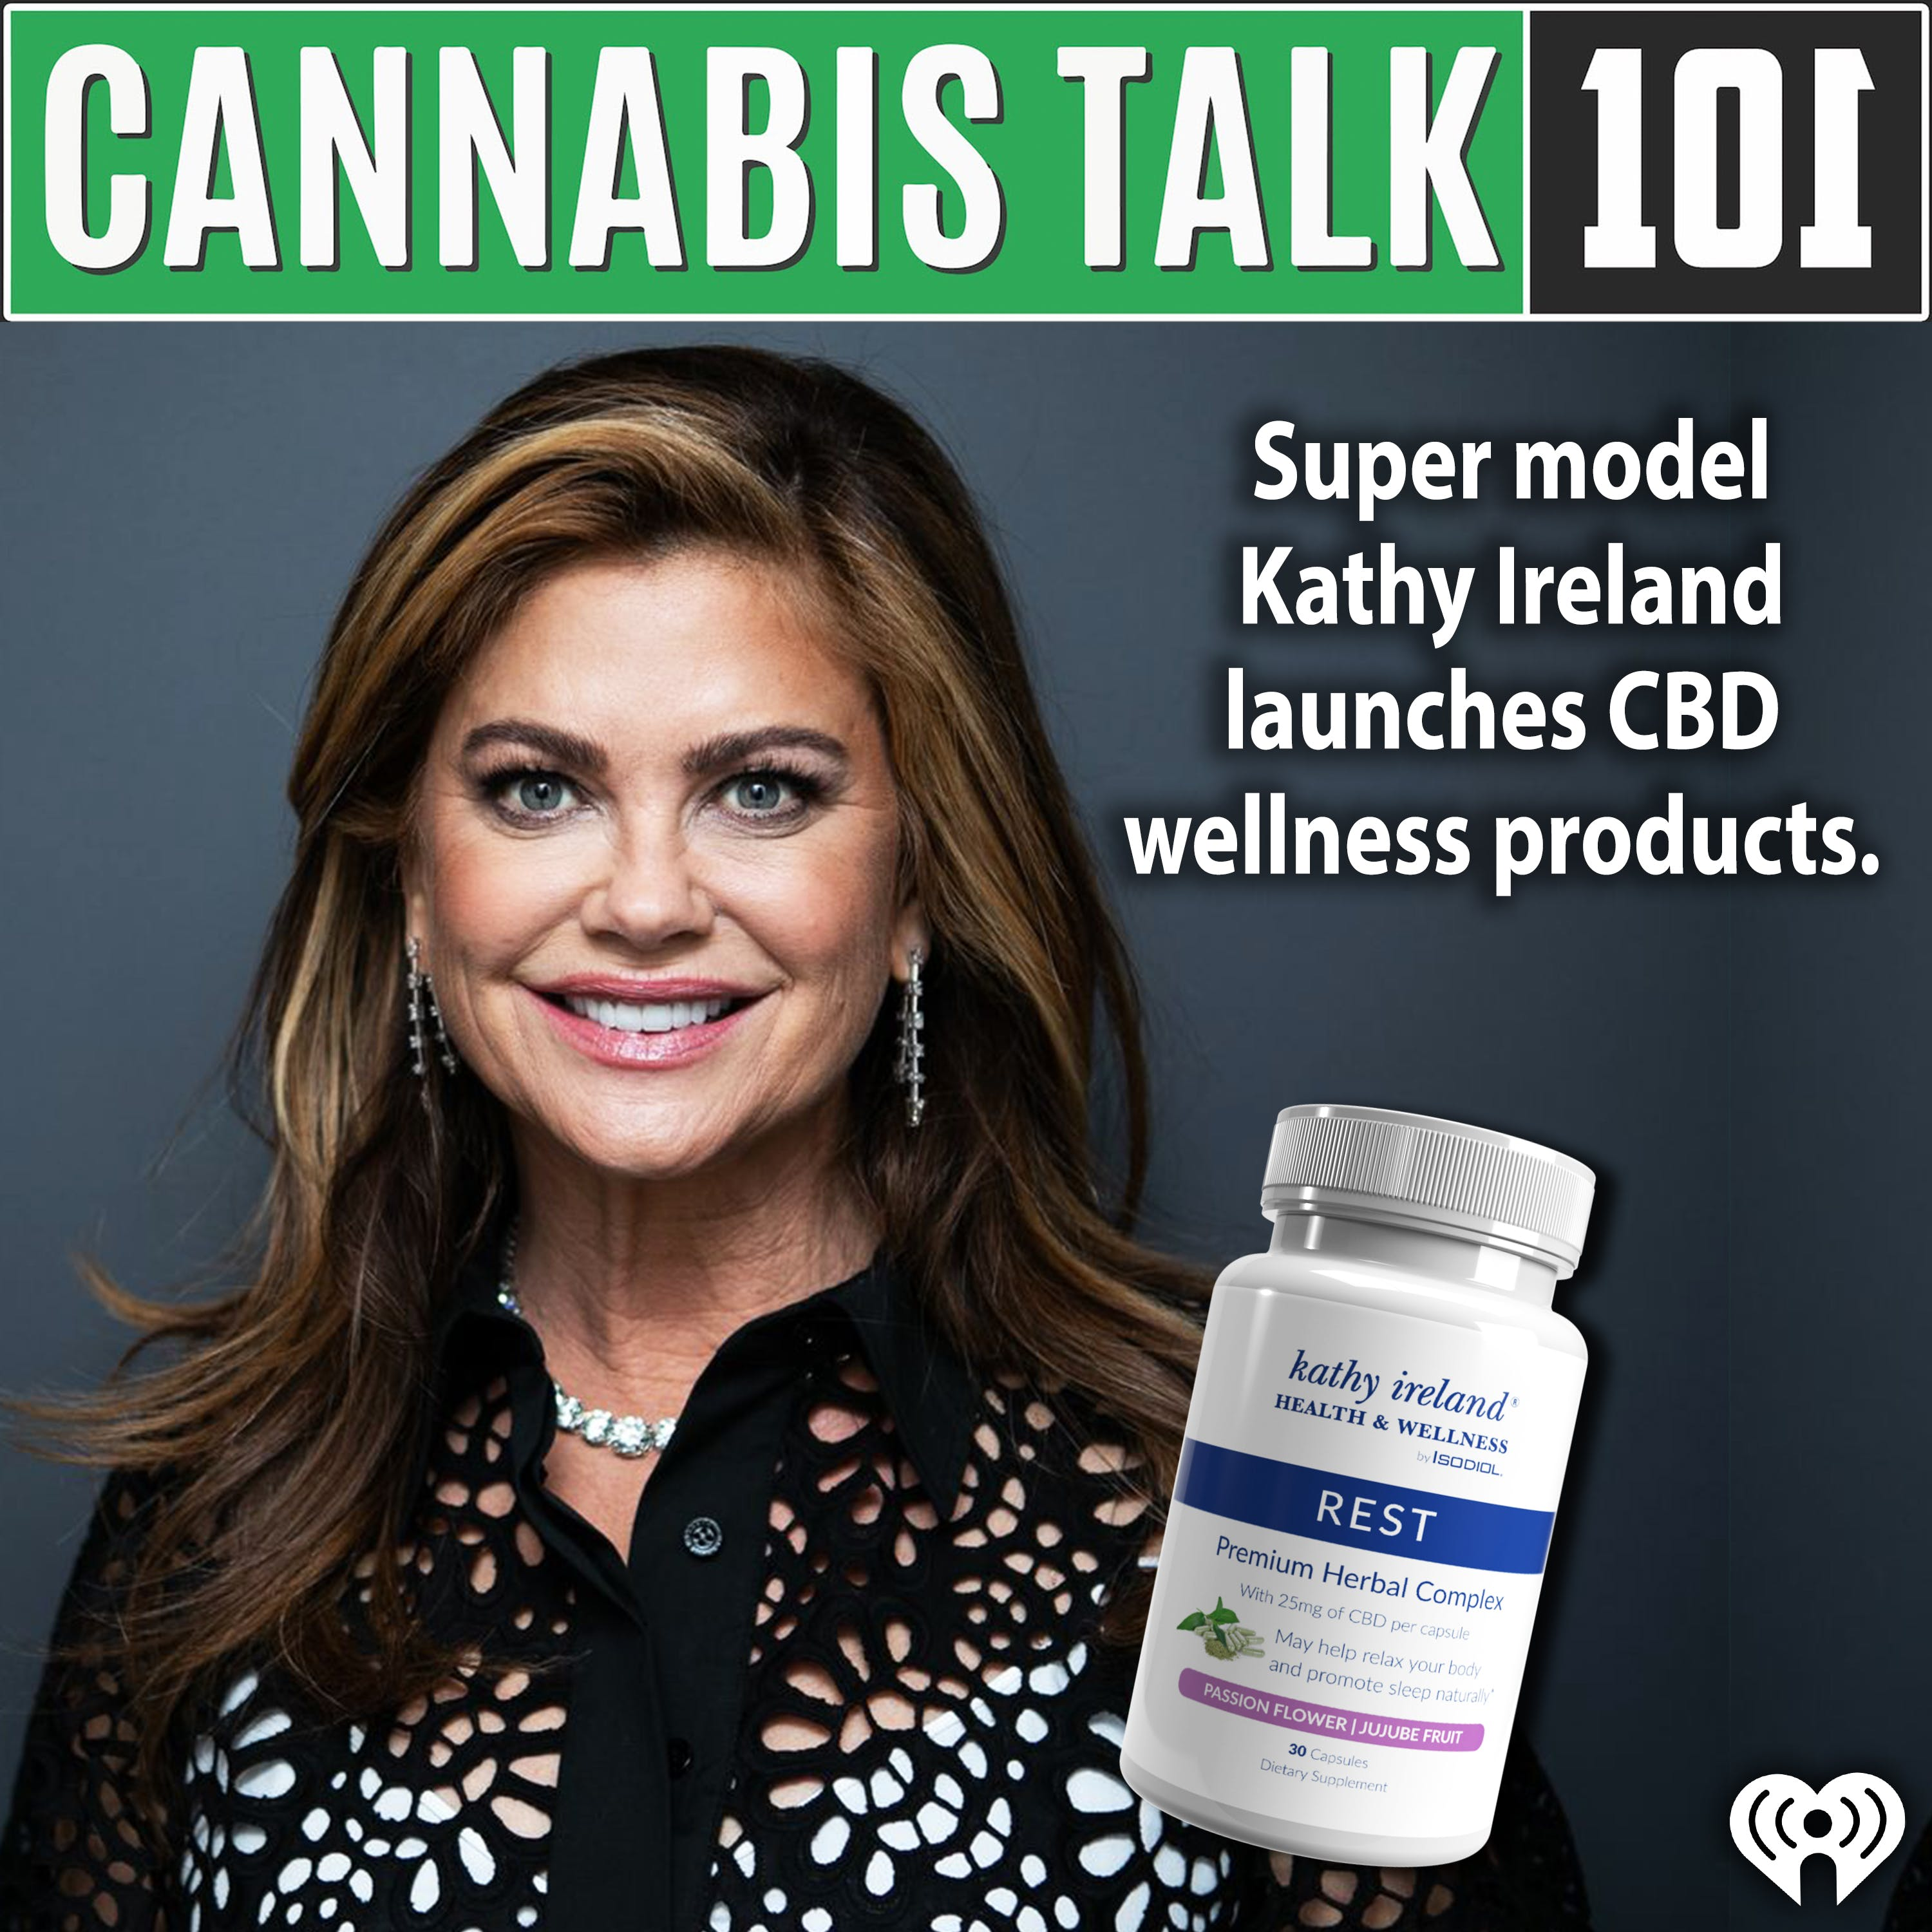 Super model Kathy Ireland launches CBD wellness products. 